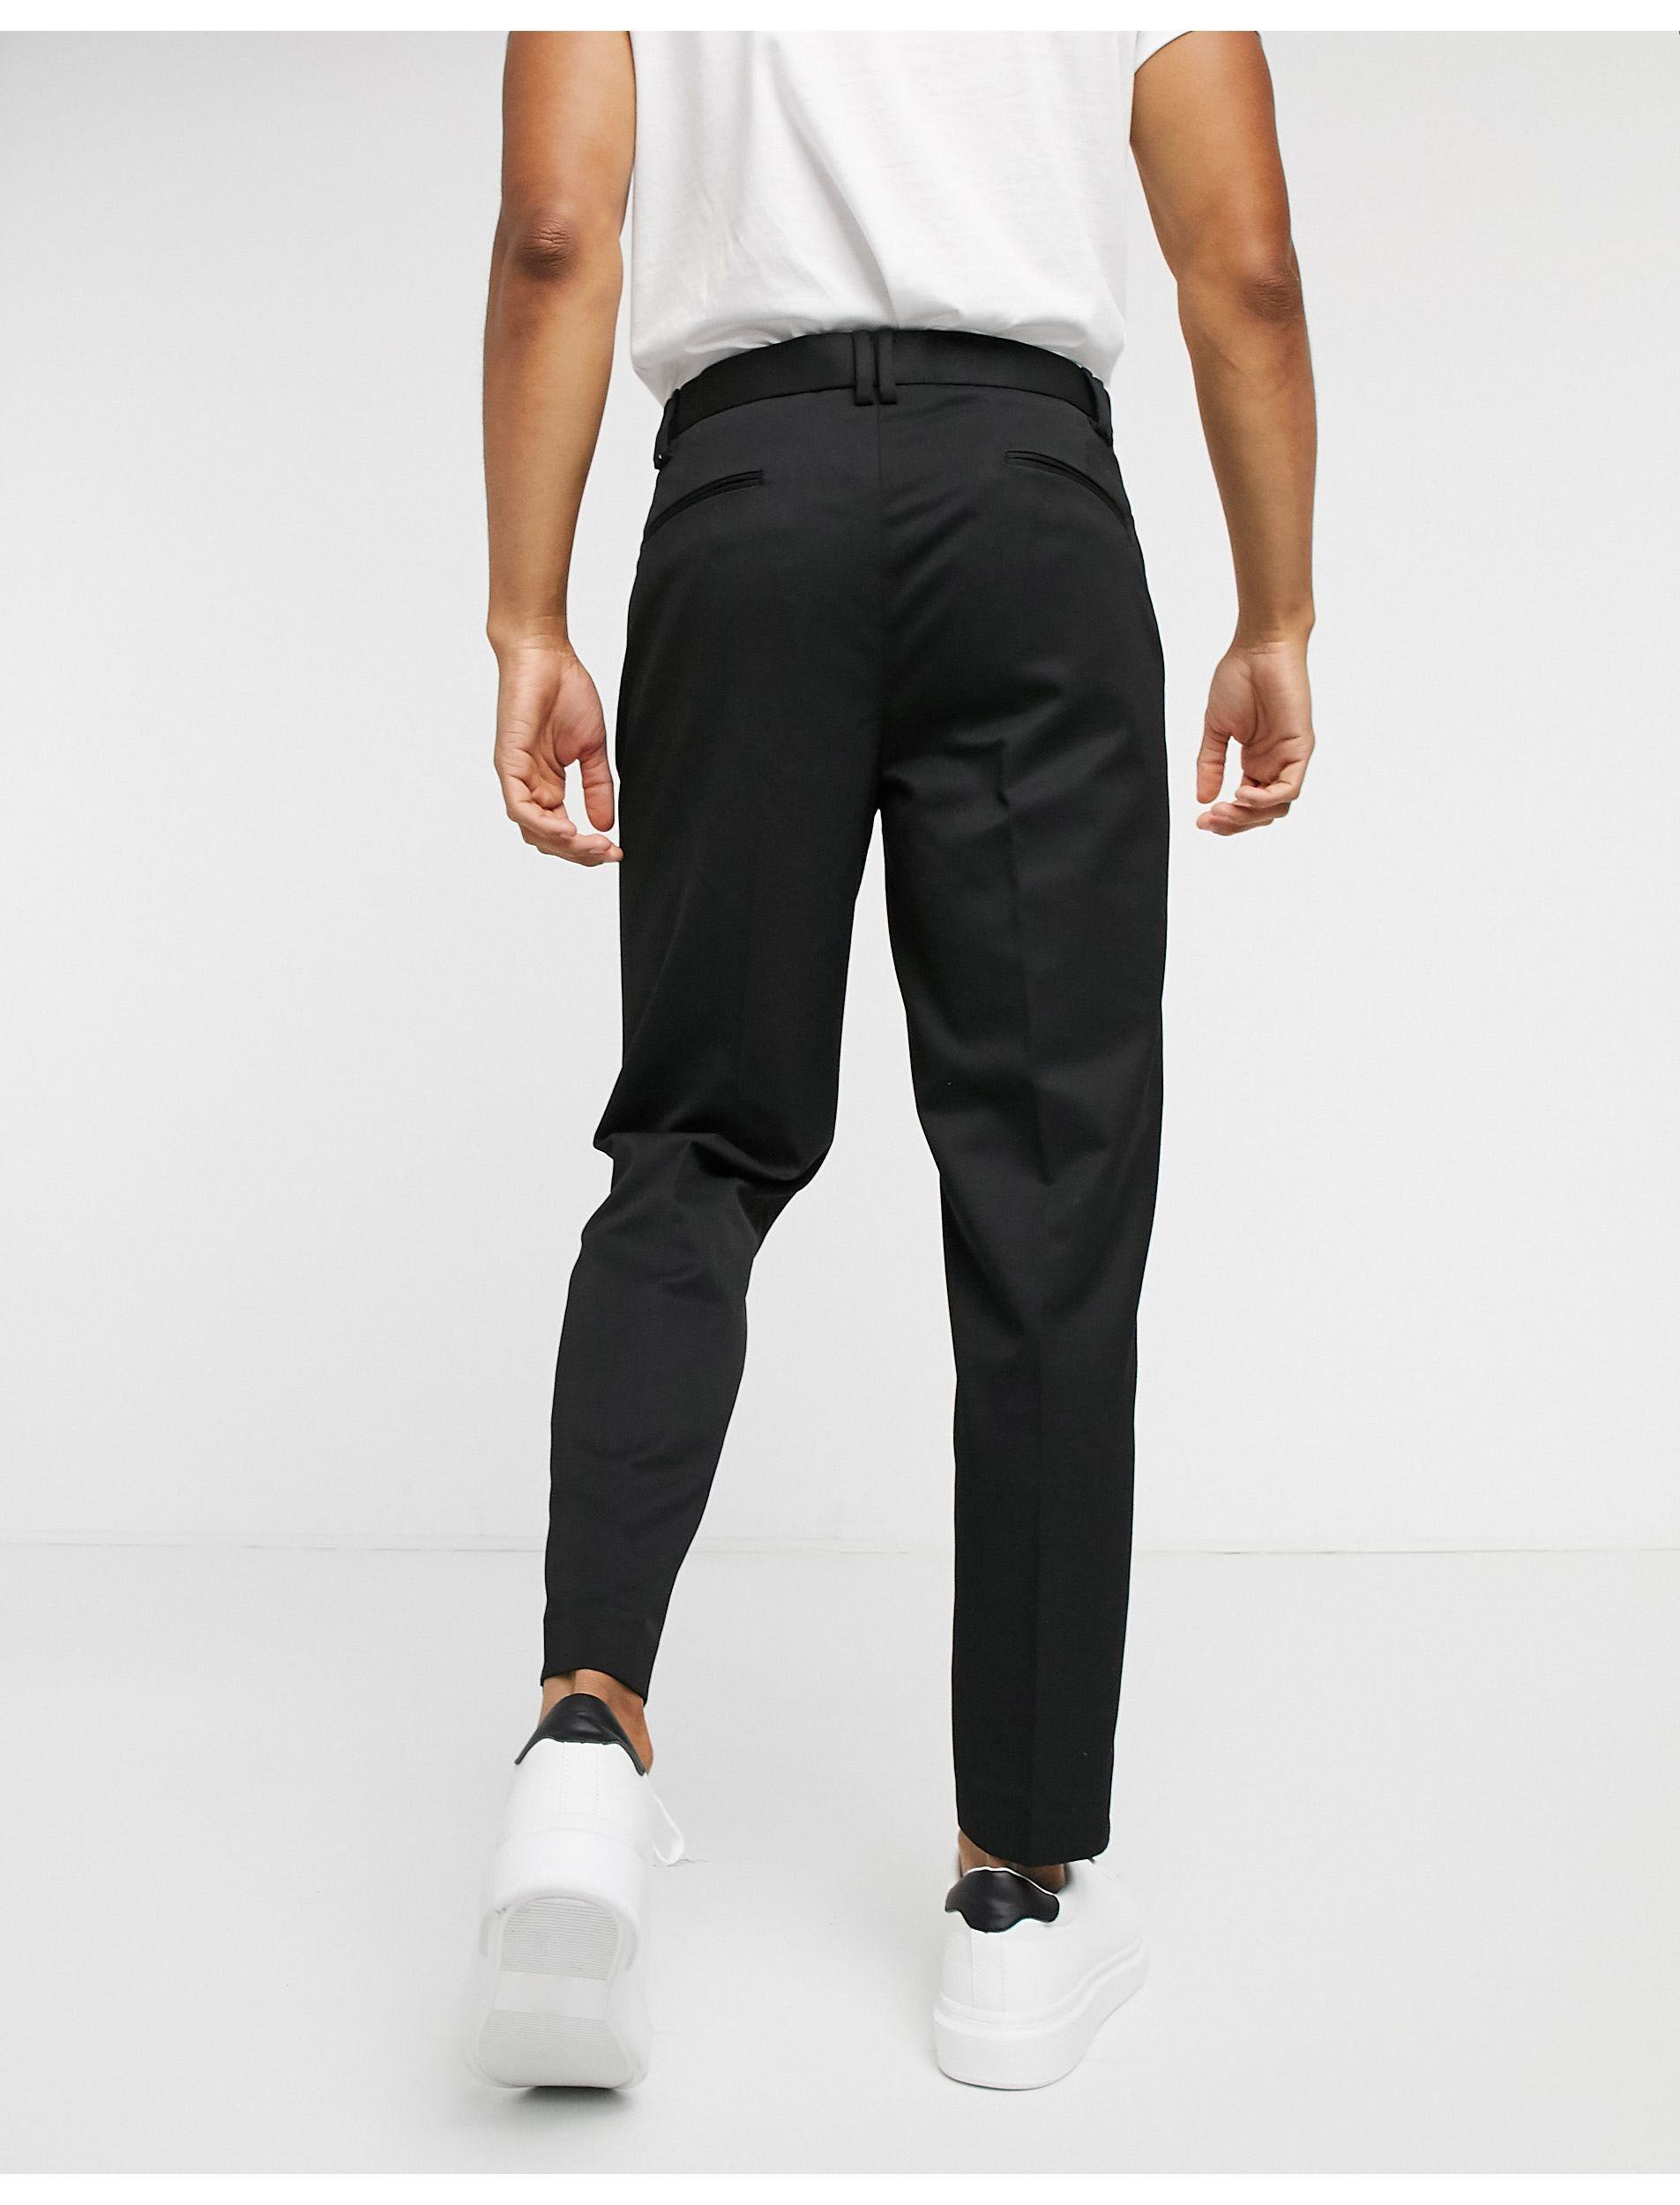 The Return of Mens Pleated Trousers